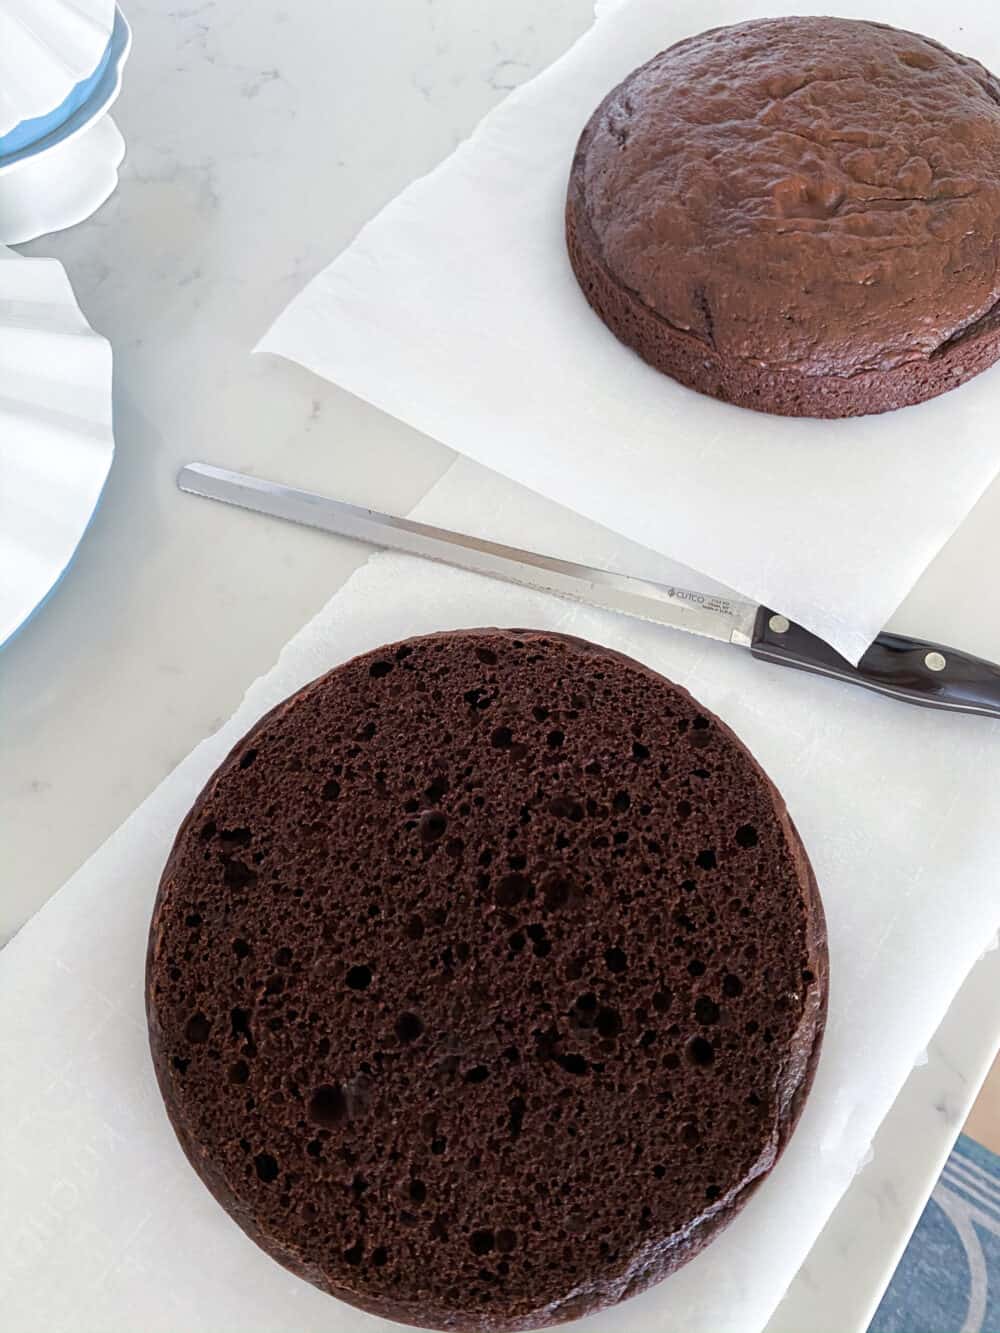 trimming baked cake tops off before frosting